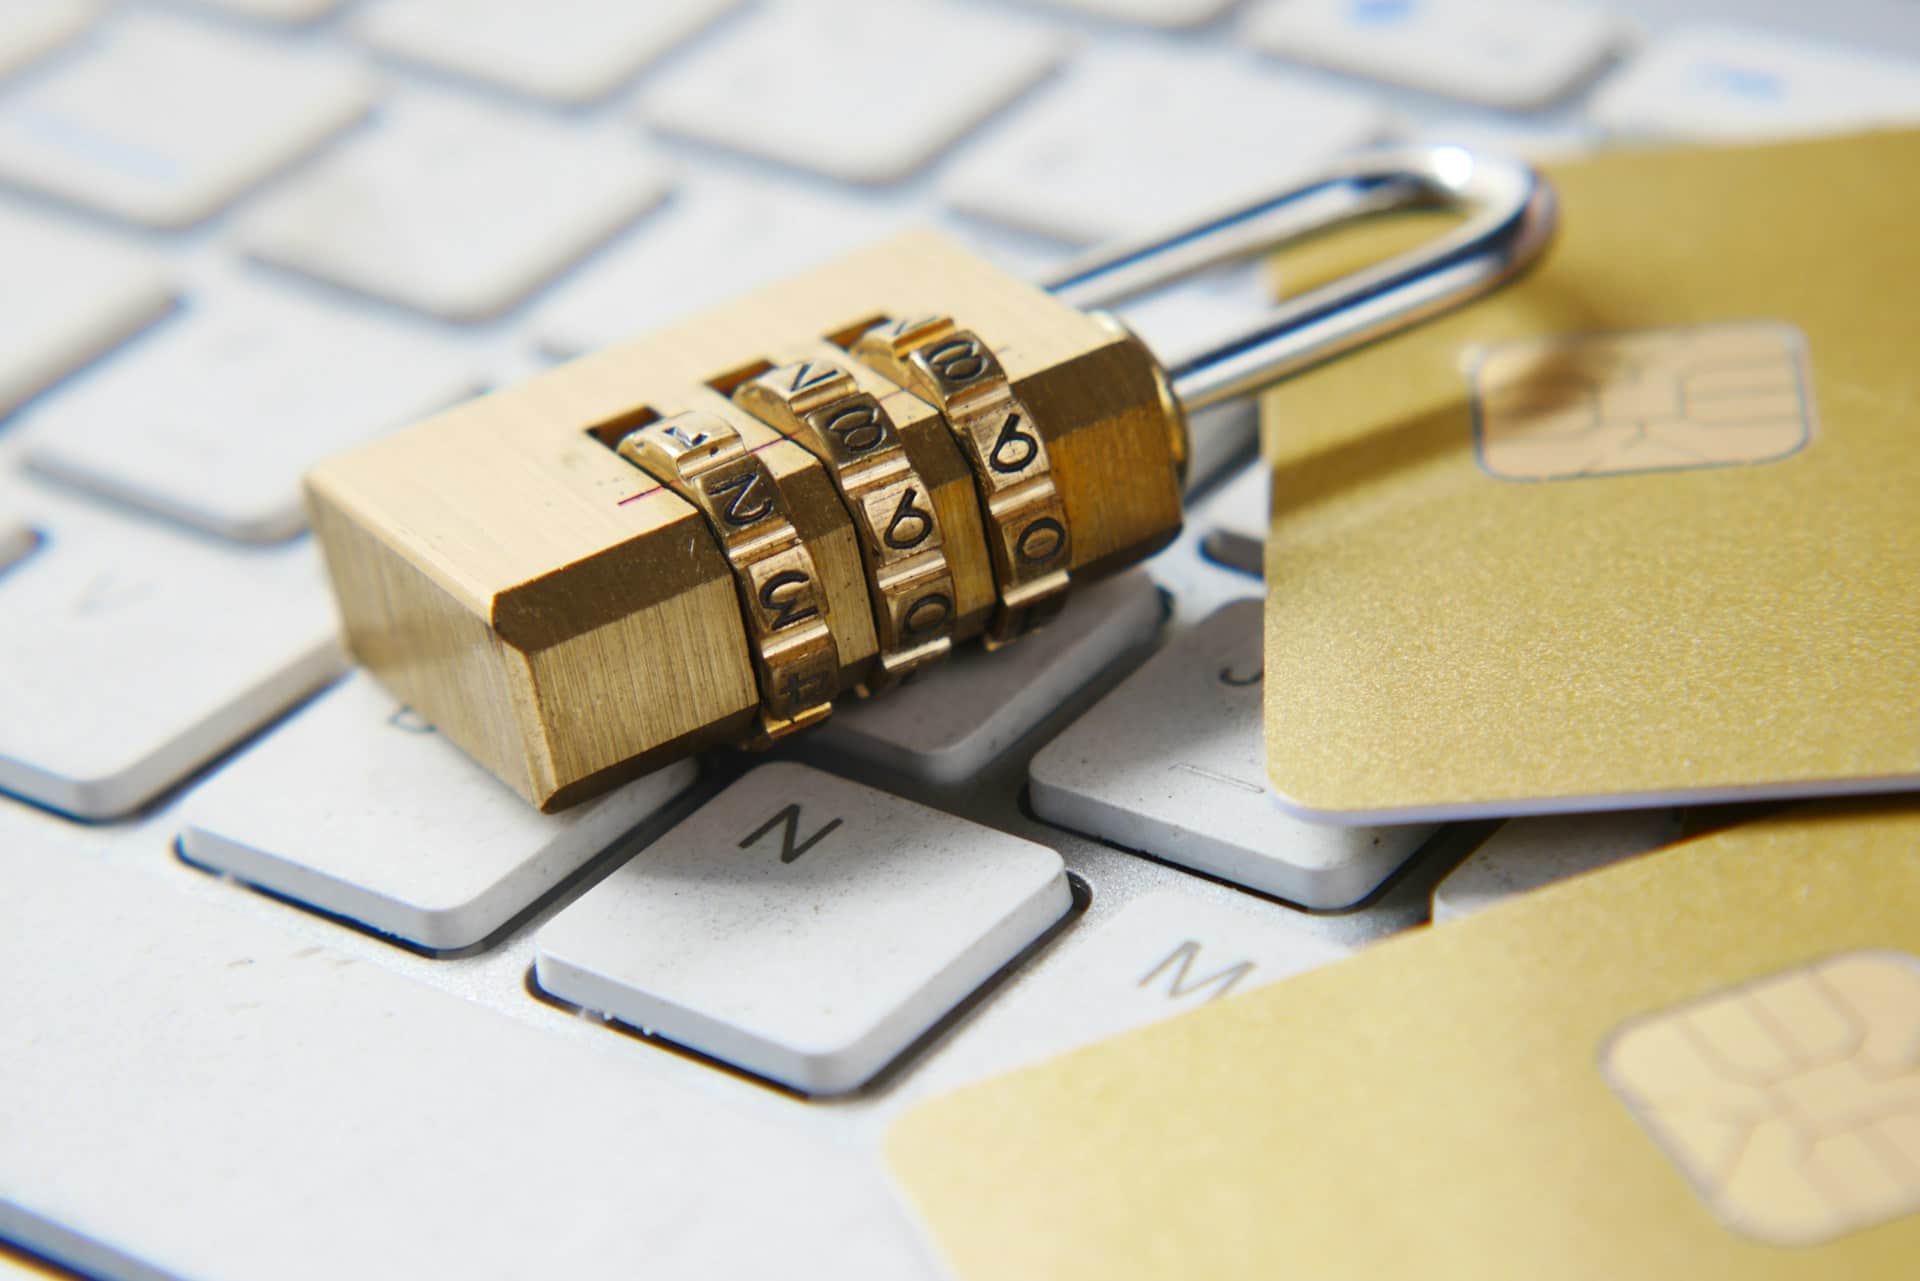 A golden padlock sitting on a keyboard next to credit cards